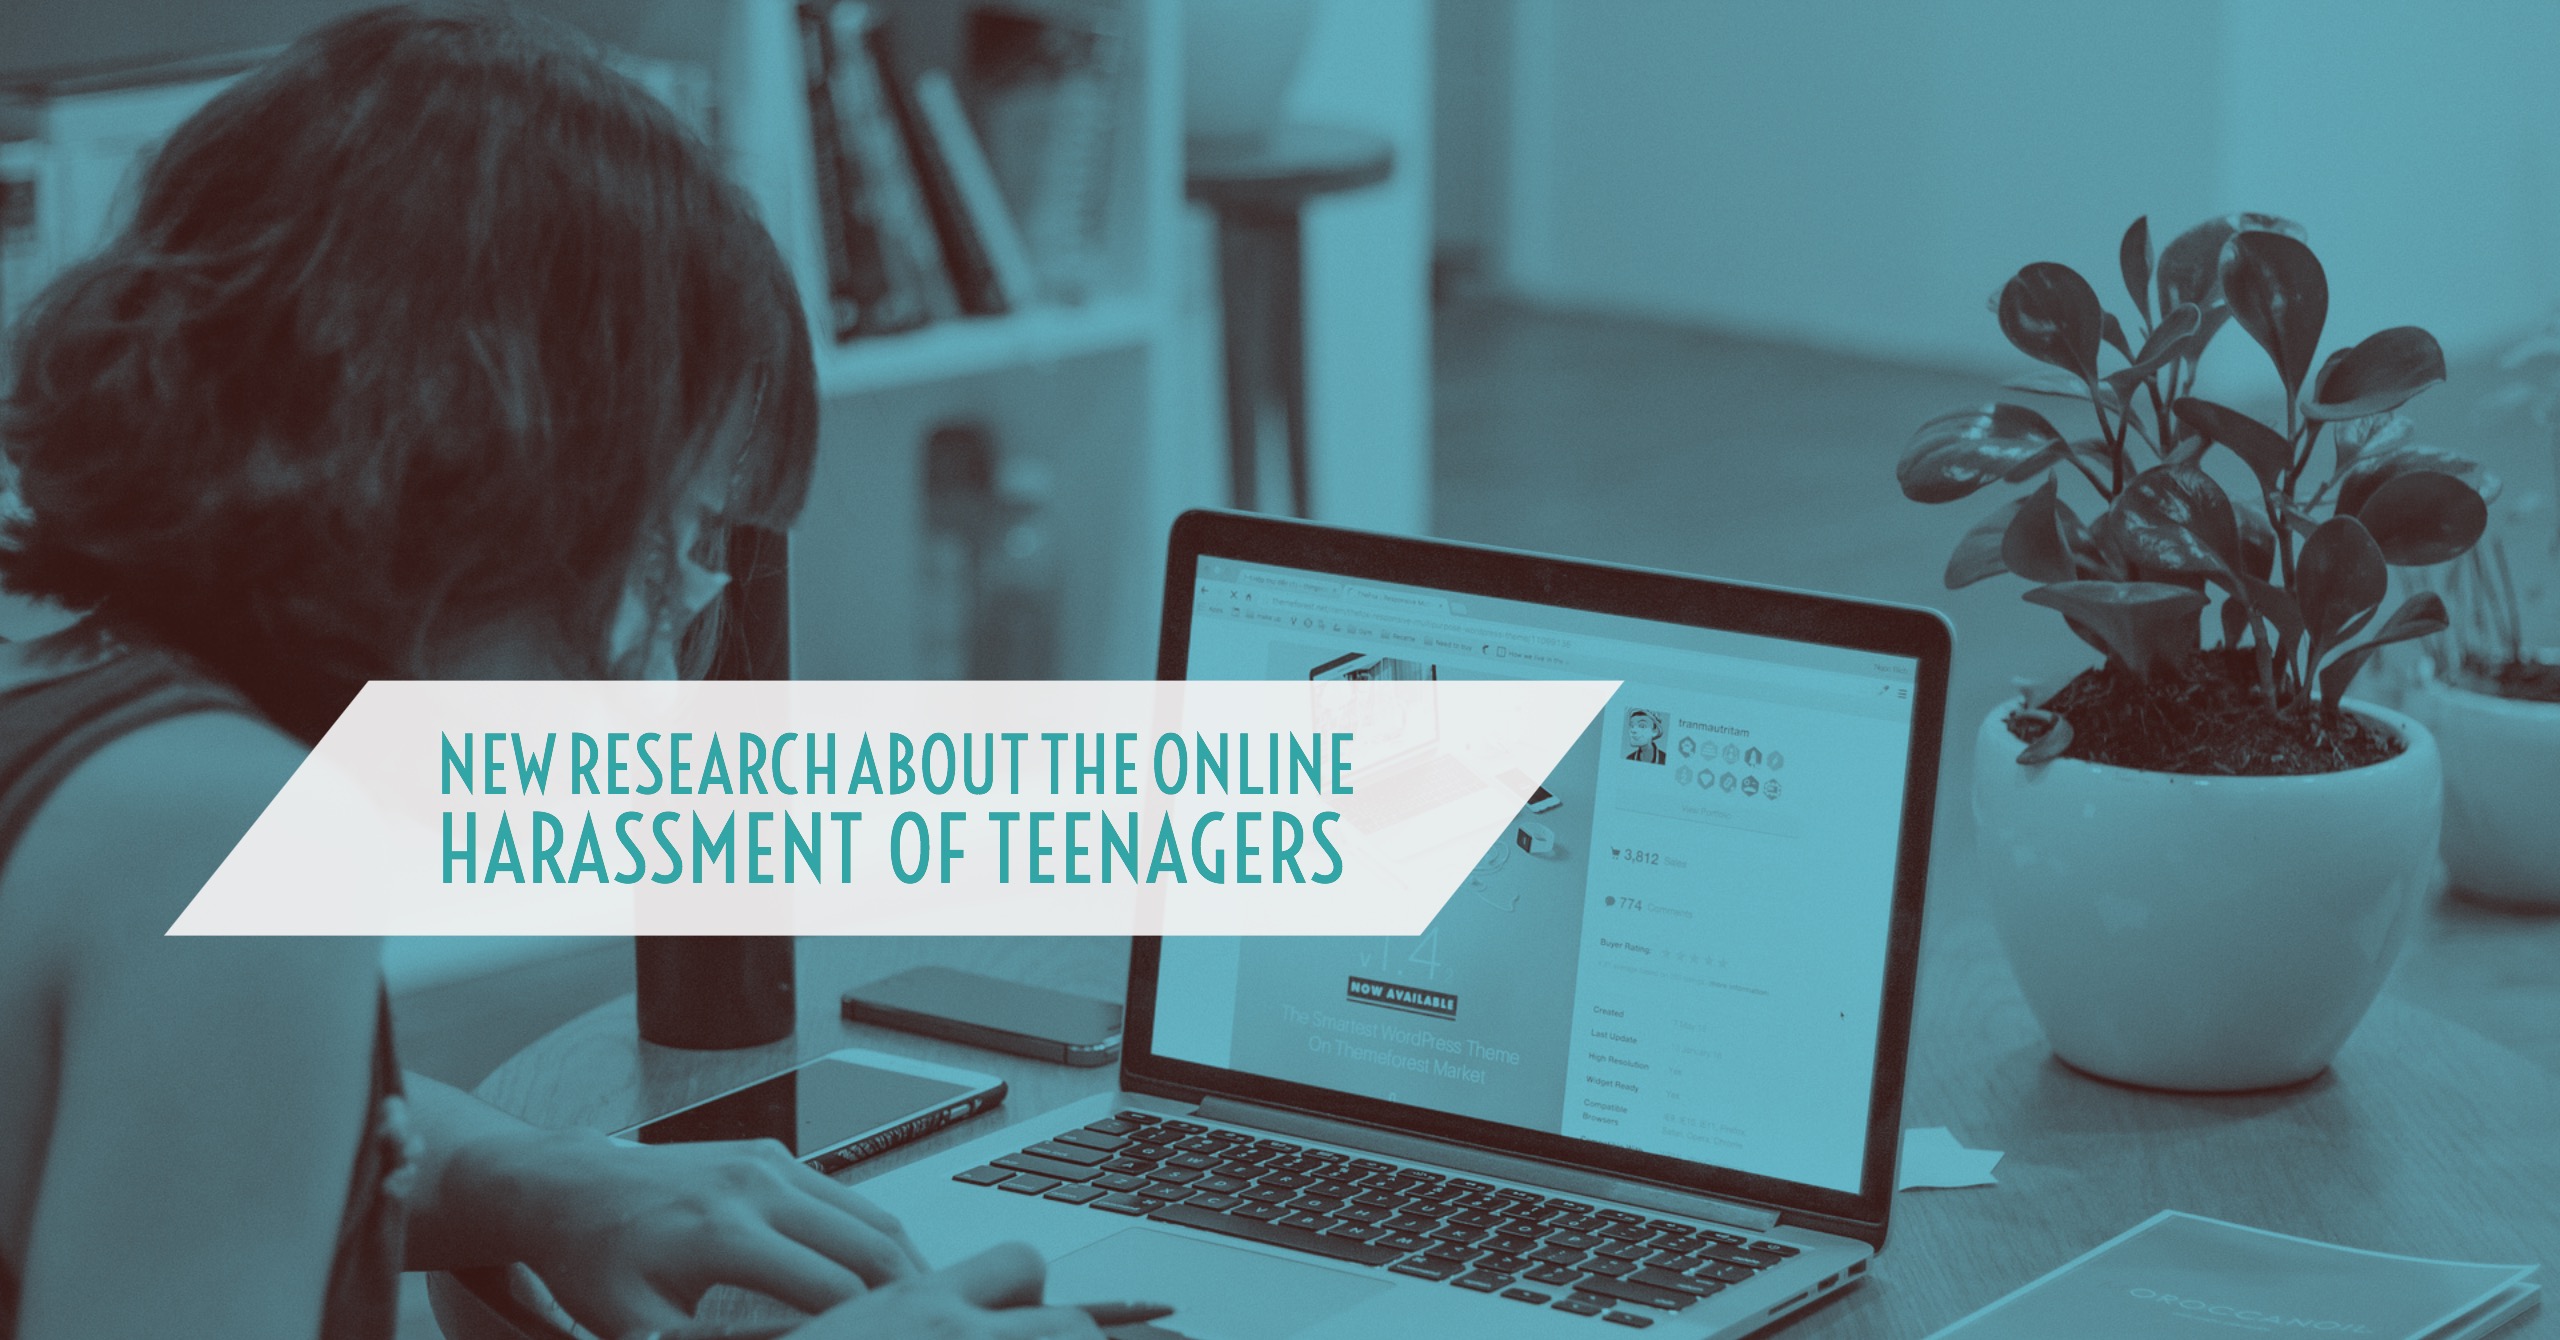 New Research About the Online Harassment of Teenagers